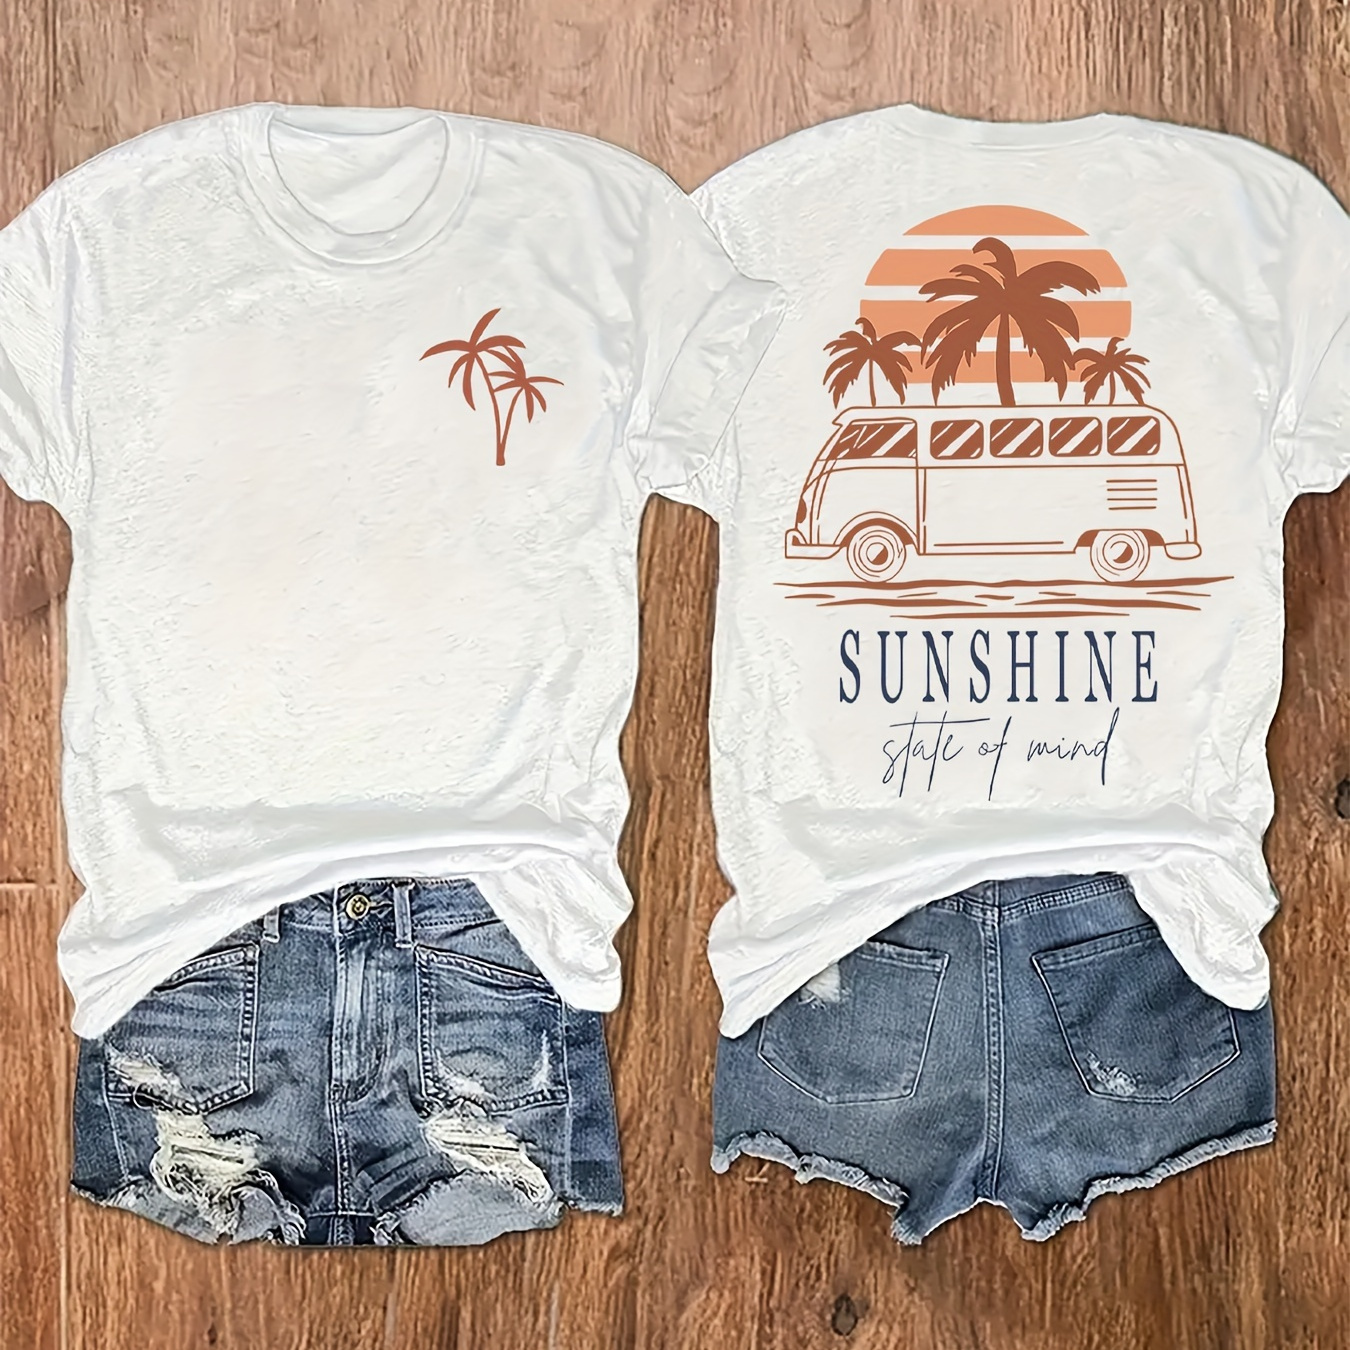 

Plus Size Palm Tree And Vintage Van Print T-shirt, Relaxed Fit Short Sleeve Crew Neck Top For Summer & Spring, Women's Plus Size Clothing